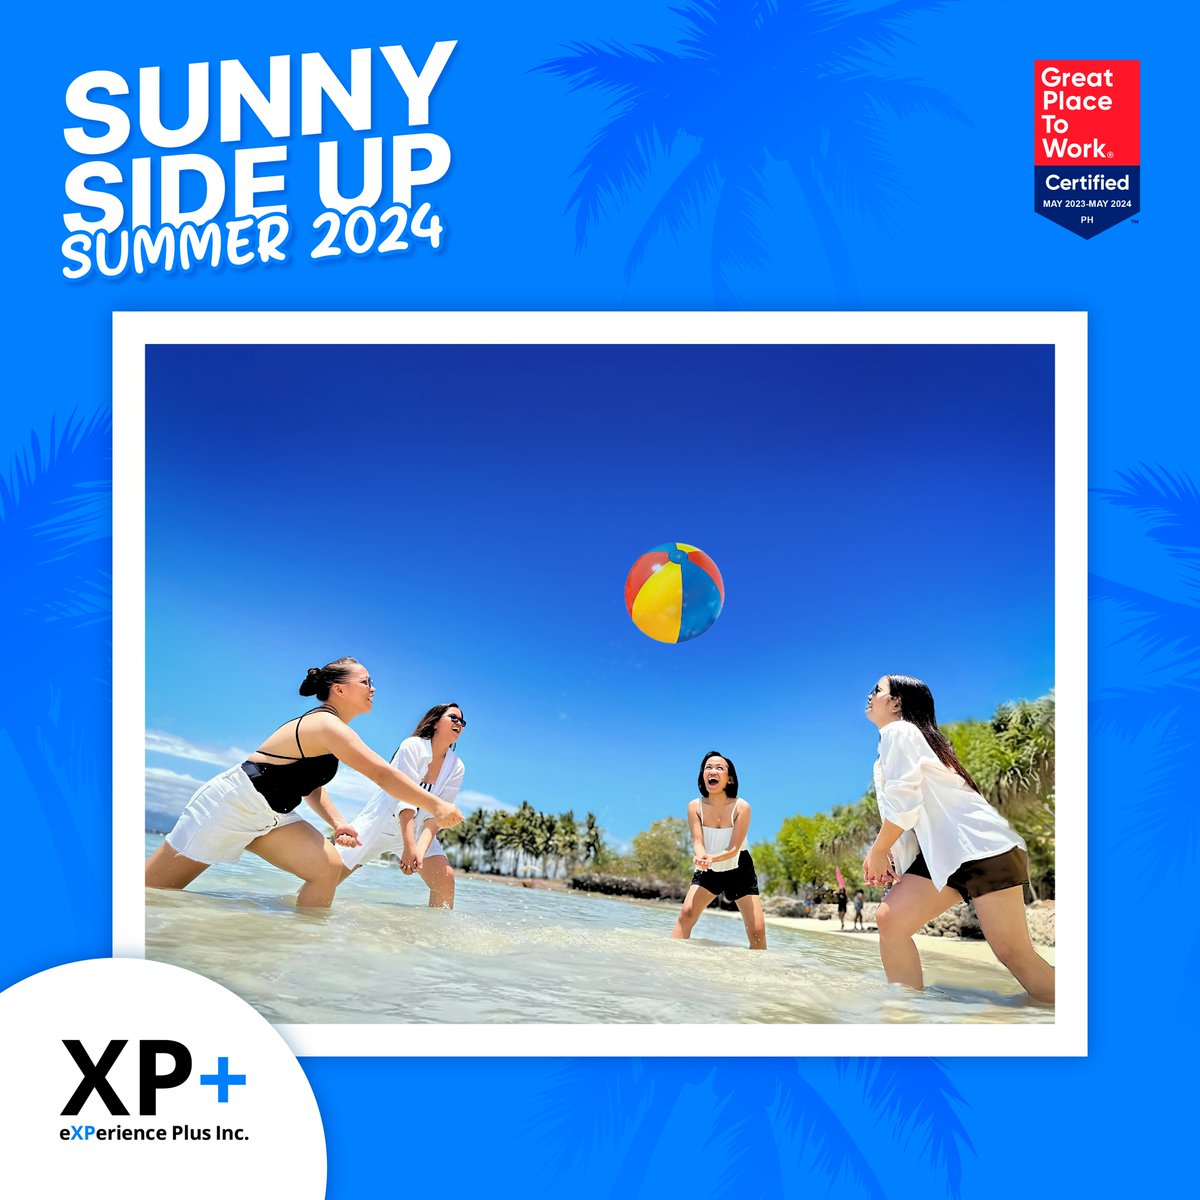 A DAY AT THE BEACH. Hearts full. Spirits high.
#XPPlus #GreatPlaceToWork